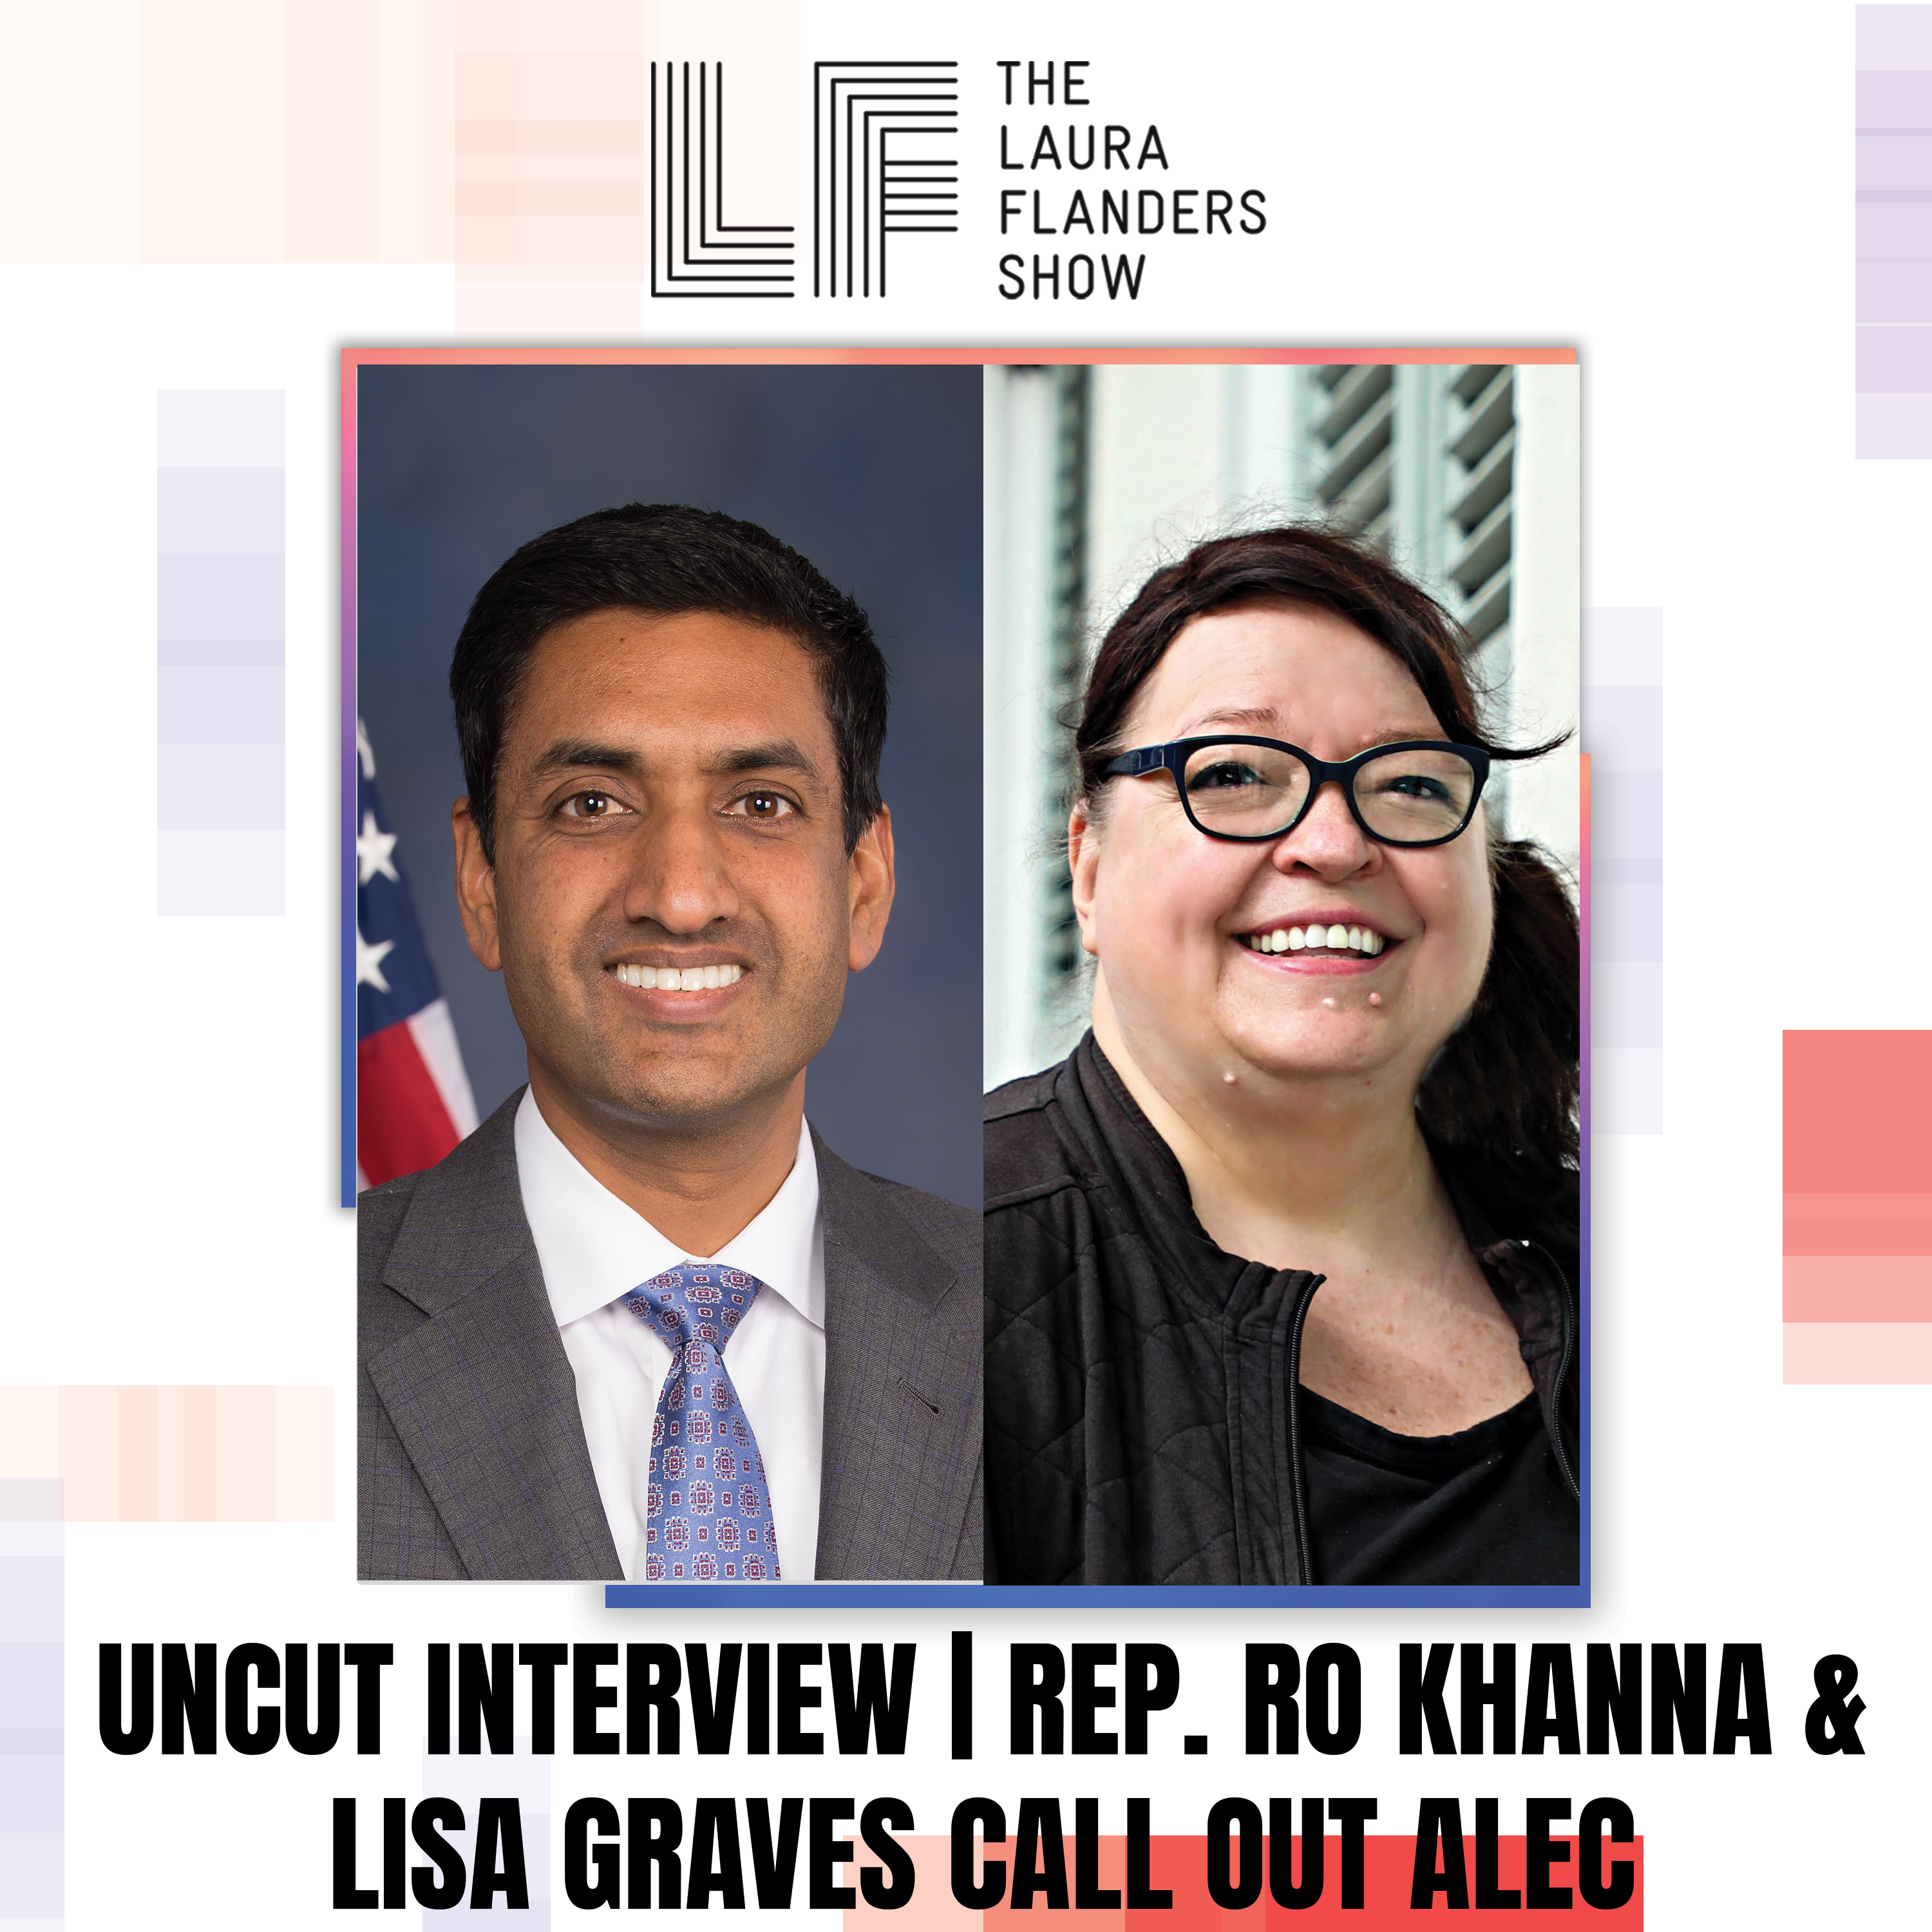 Photo of Rep. Ro Khanna and Lisa Raves with text 